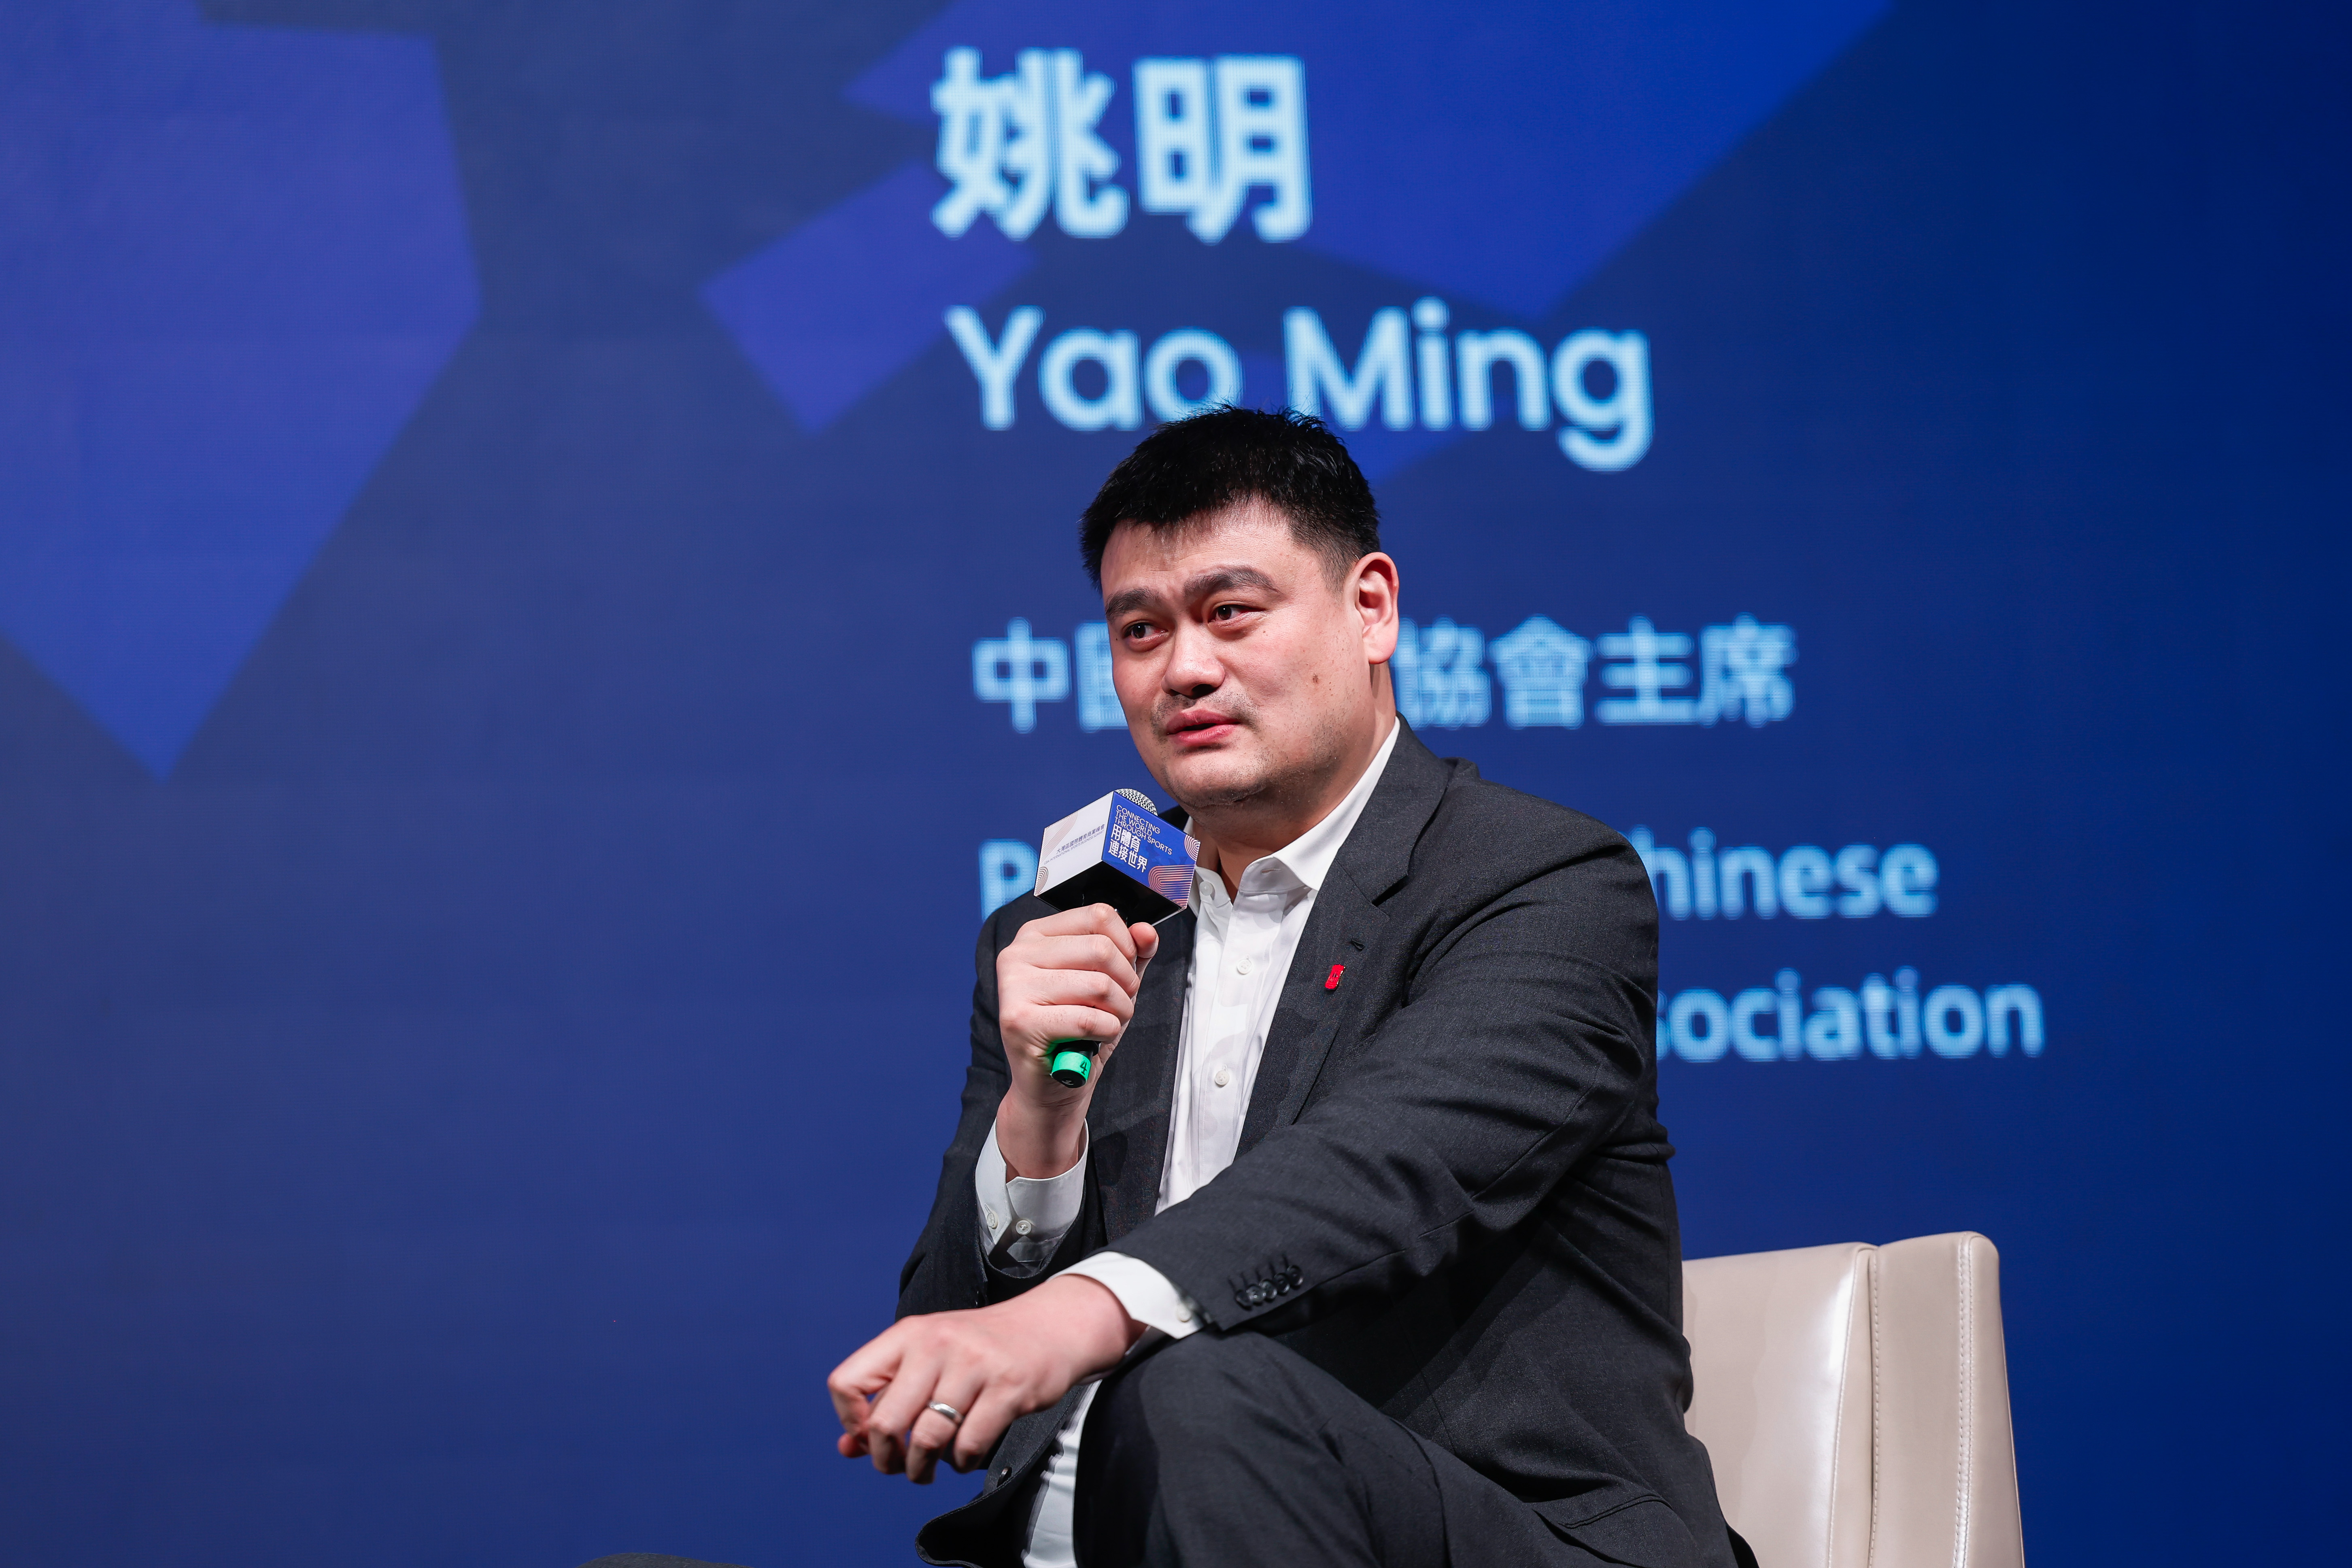 Chinese Basketball Association President Yao Ming speaks at the Greater Bay Area International Sports Business Summit in Macao on Friday. Photo: VCG